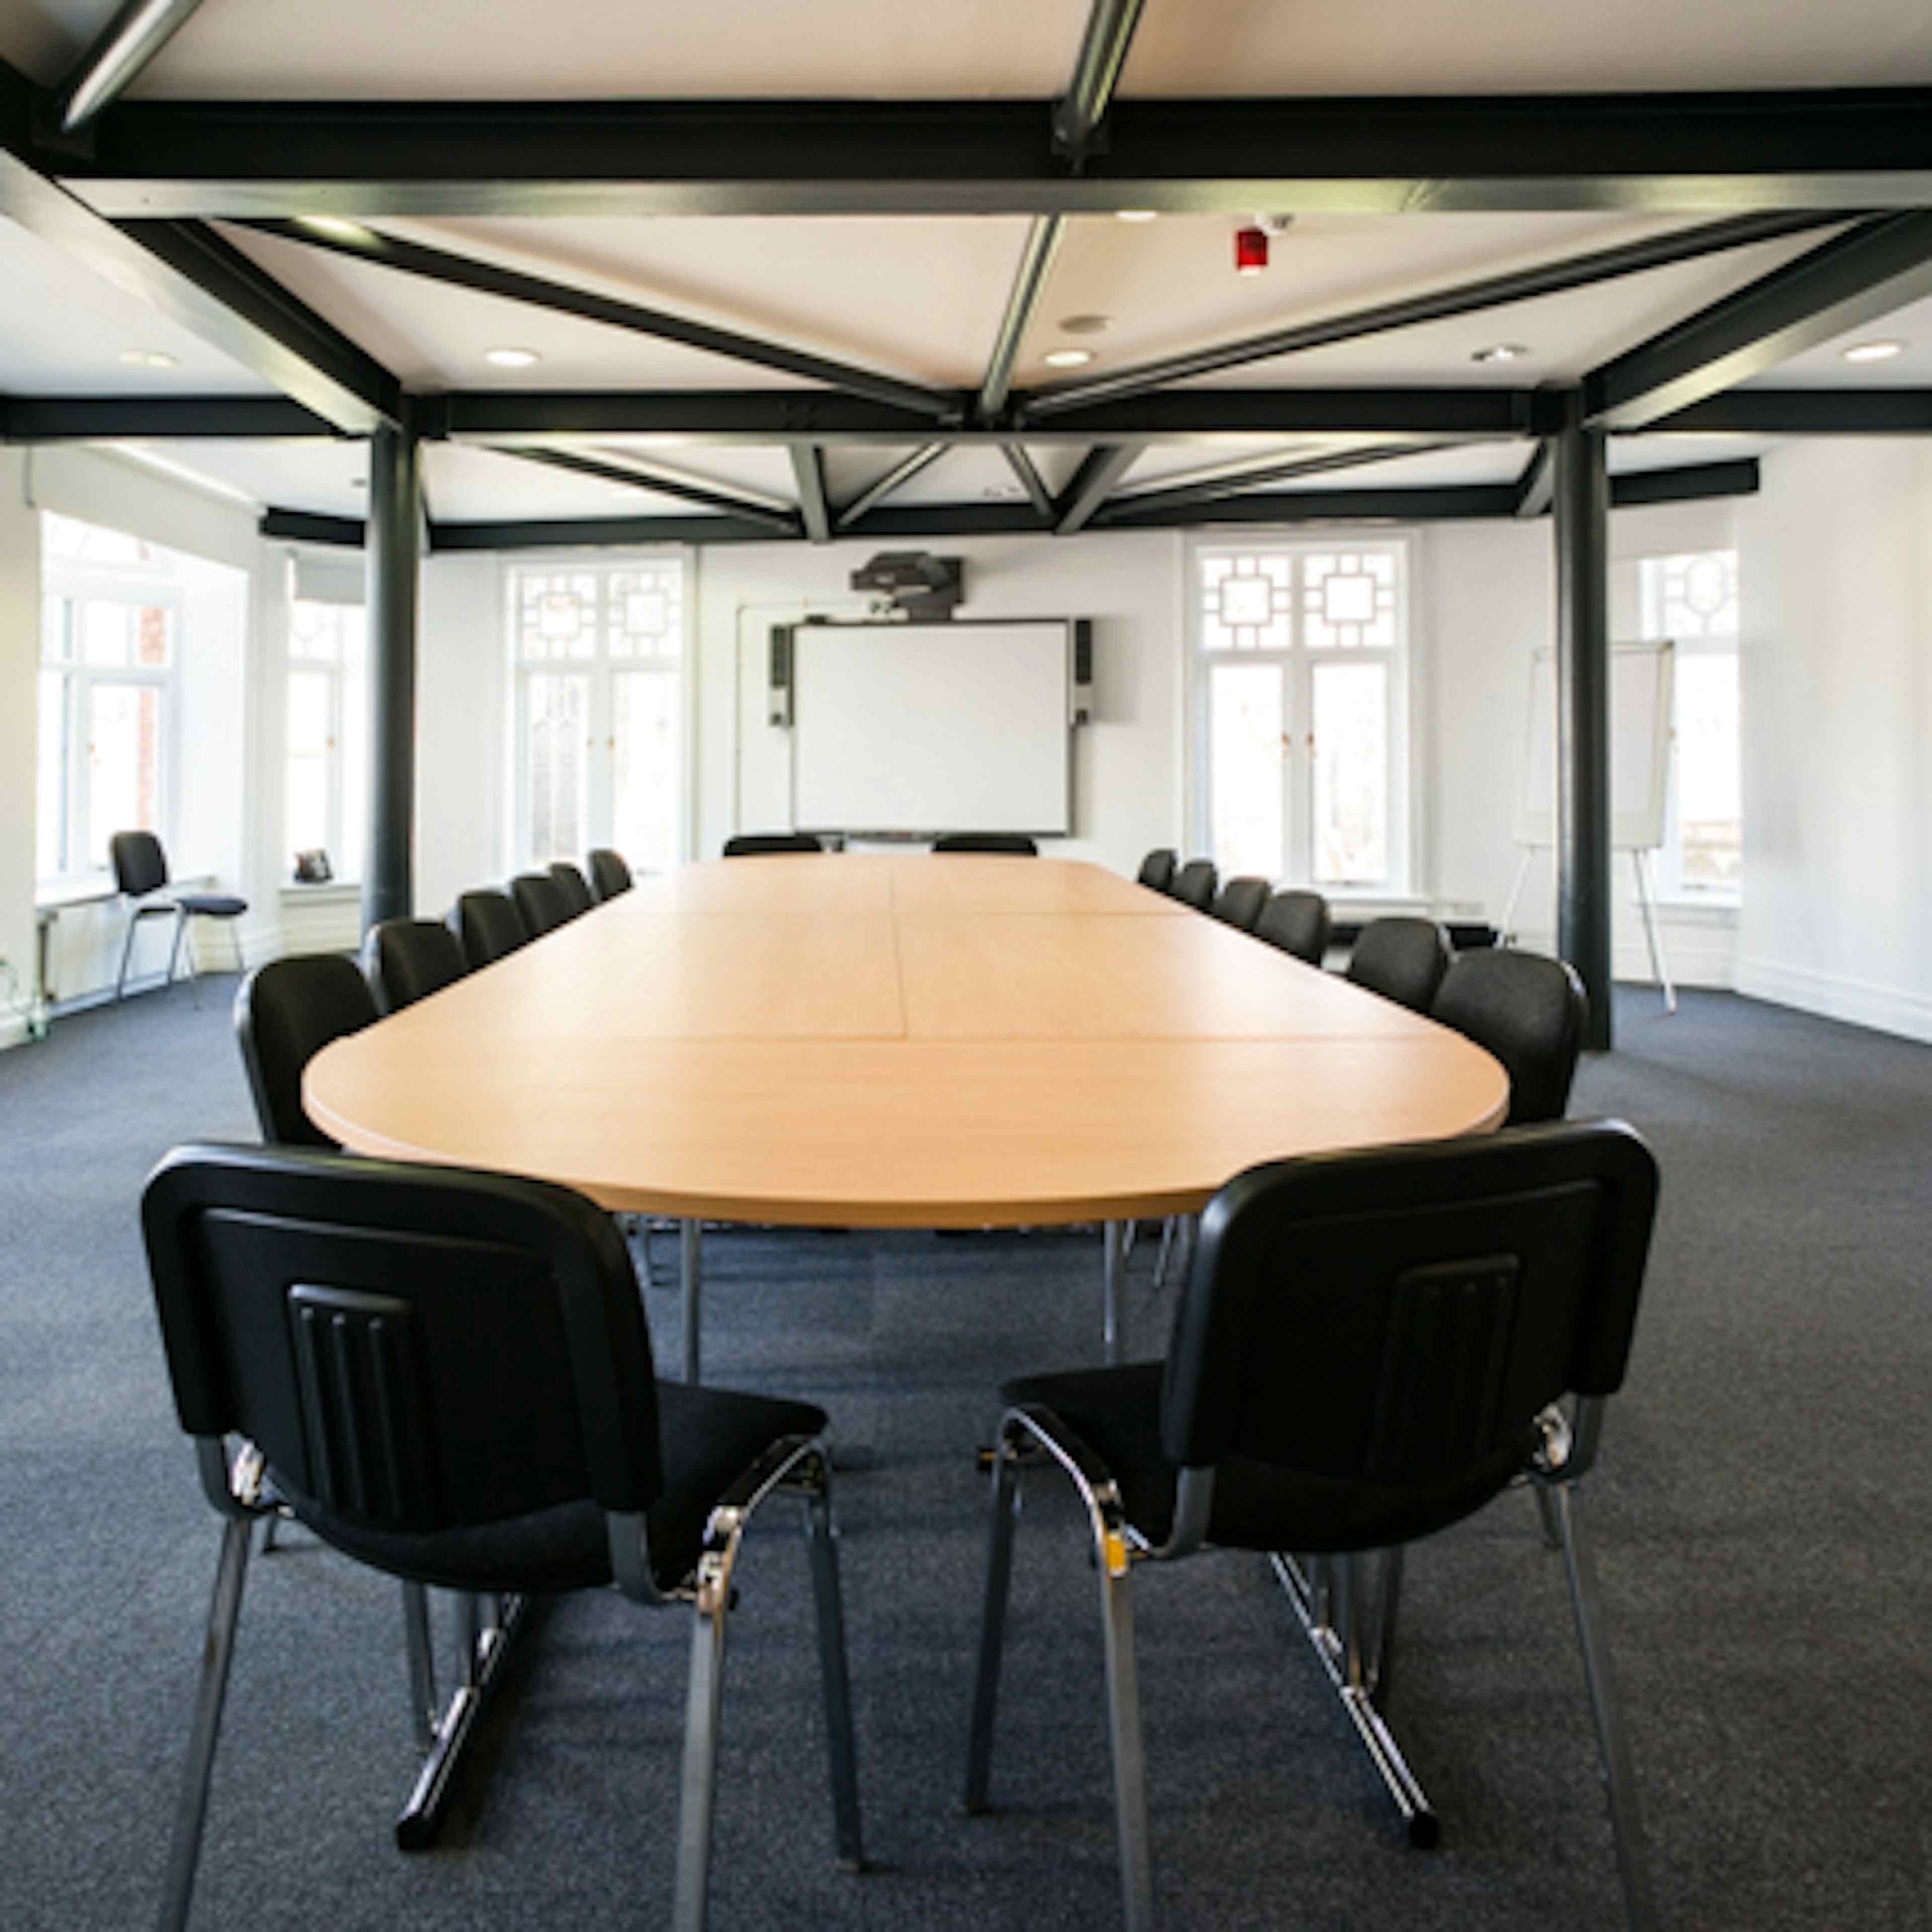 Meeting Rooms at Manchester Cathedral Visitor Centre - image 3